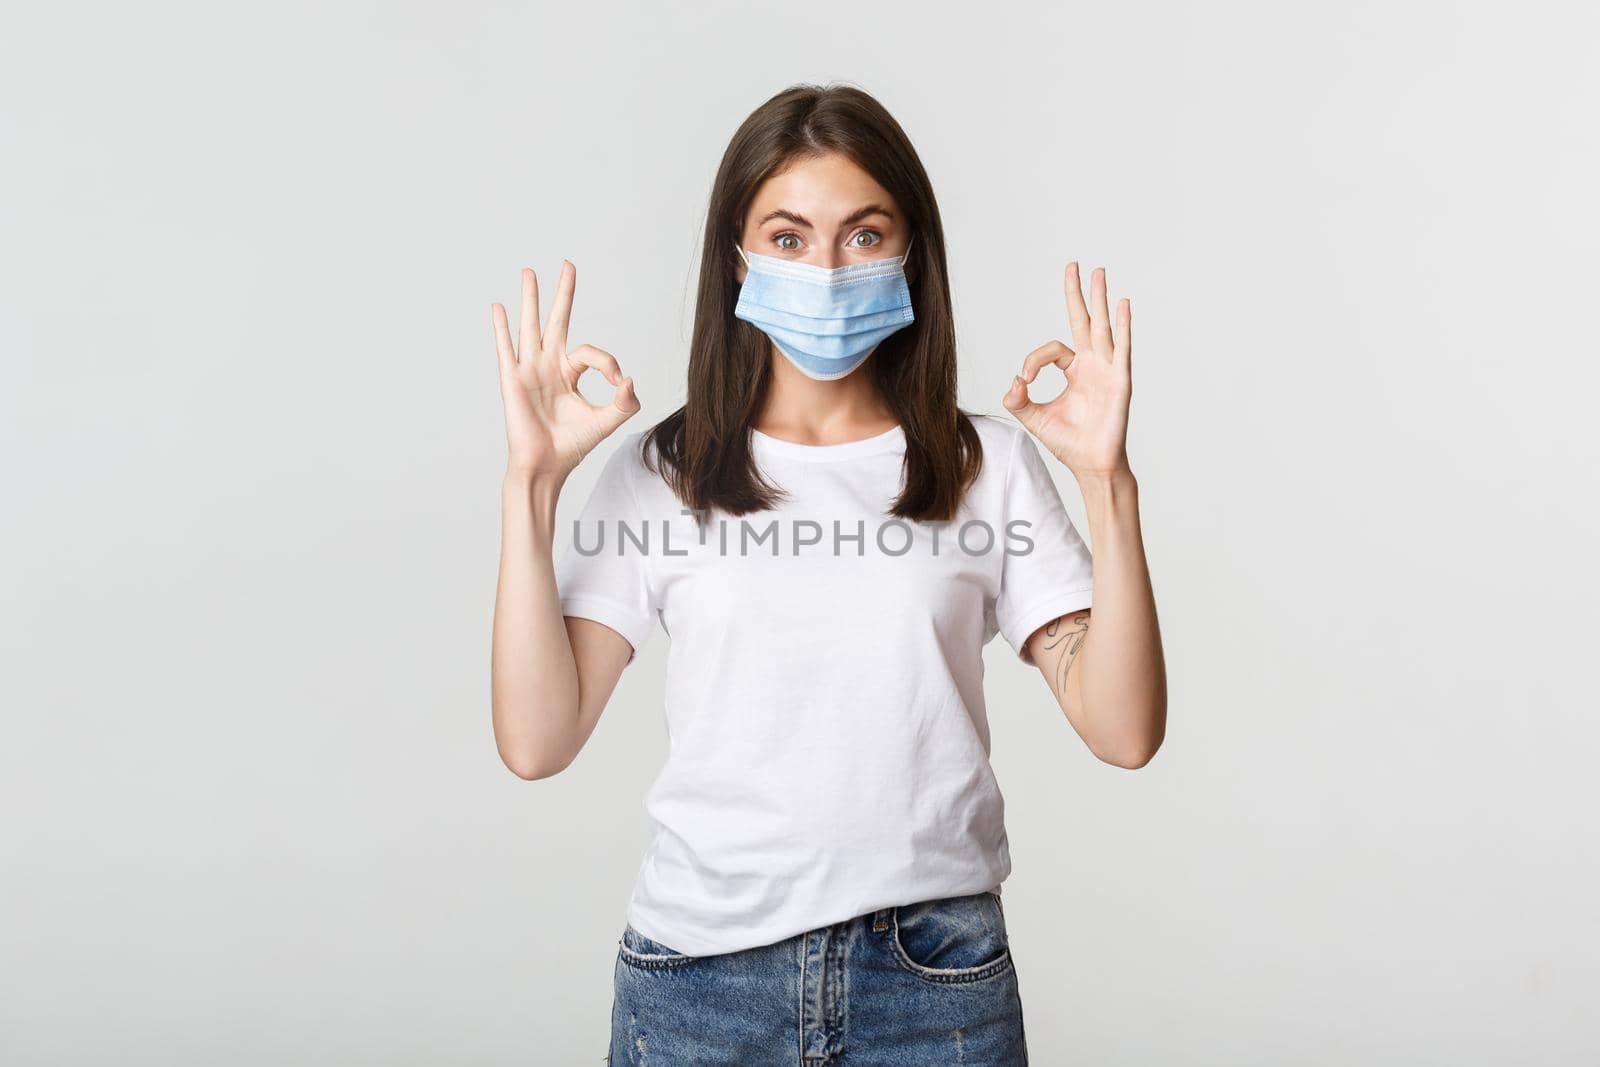 Covid-19, health and social distancing concept. Excited smiling pretty girl in medical mask showing okay gesture satisfied.